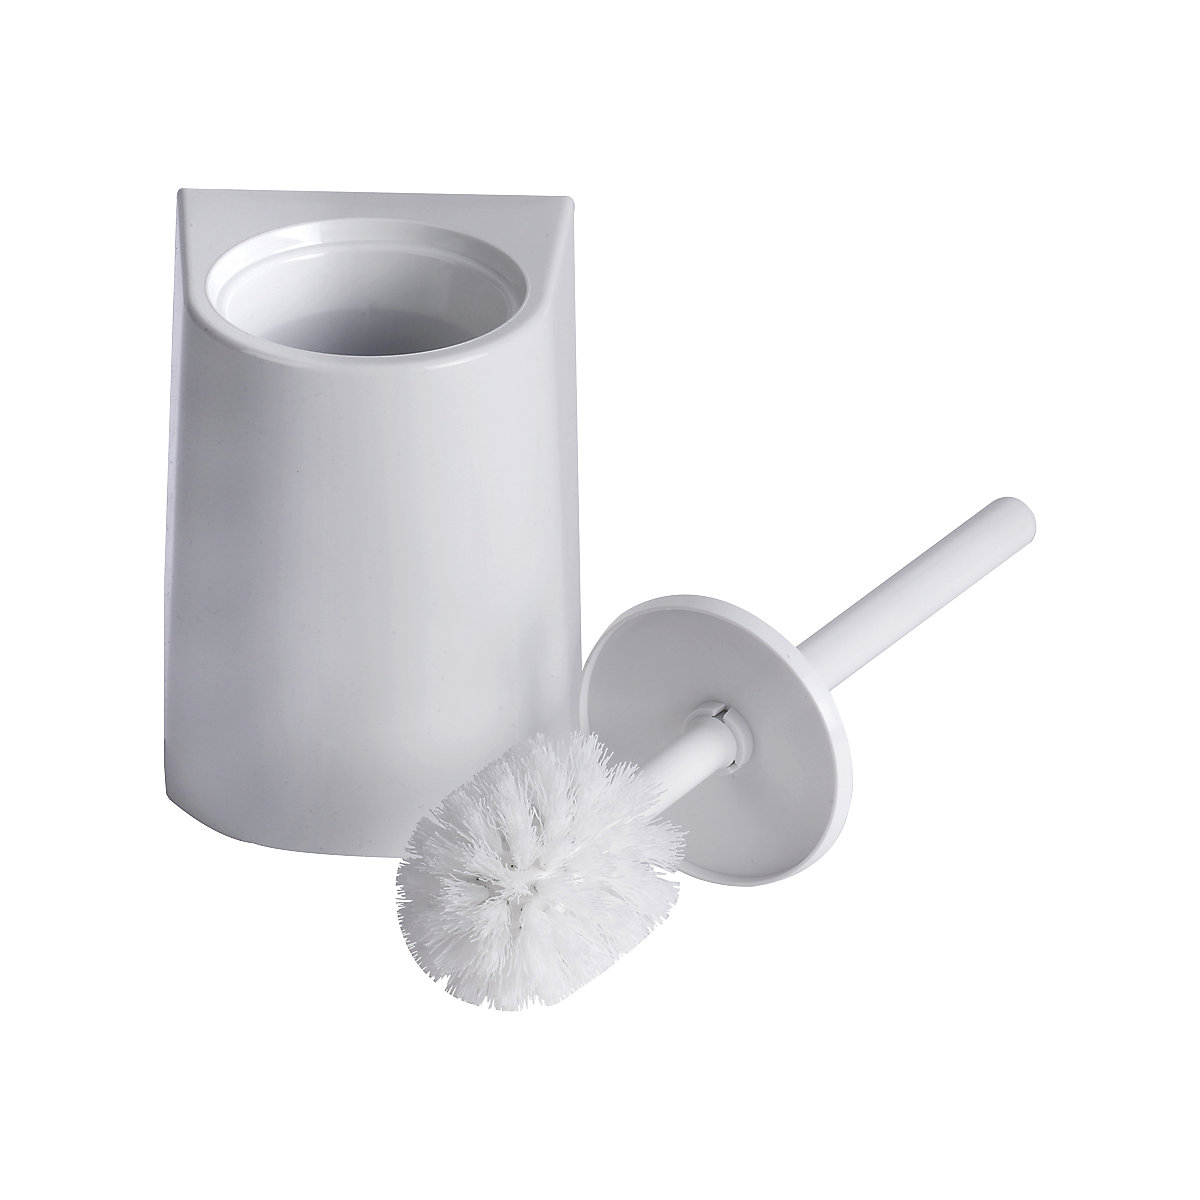 ParadiseLine toilet brush with odour seal - CWS